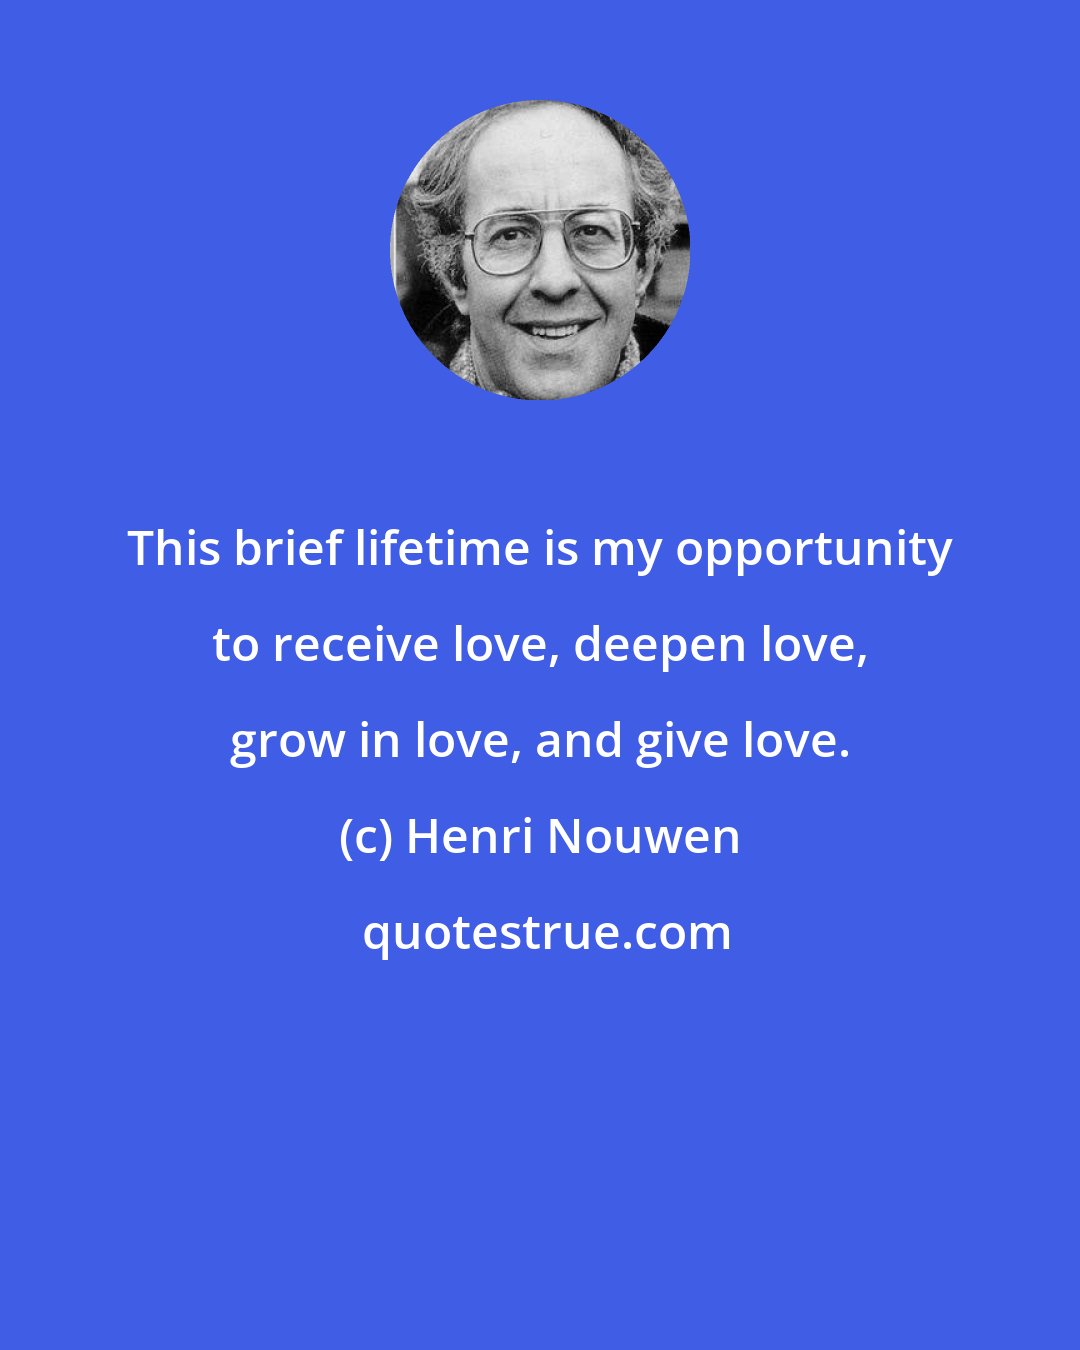 Henri Nouwen: This brief lifetime is my opportunity to receive love, deepen love, grow in love, and give love.